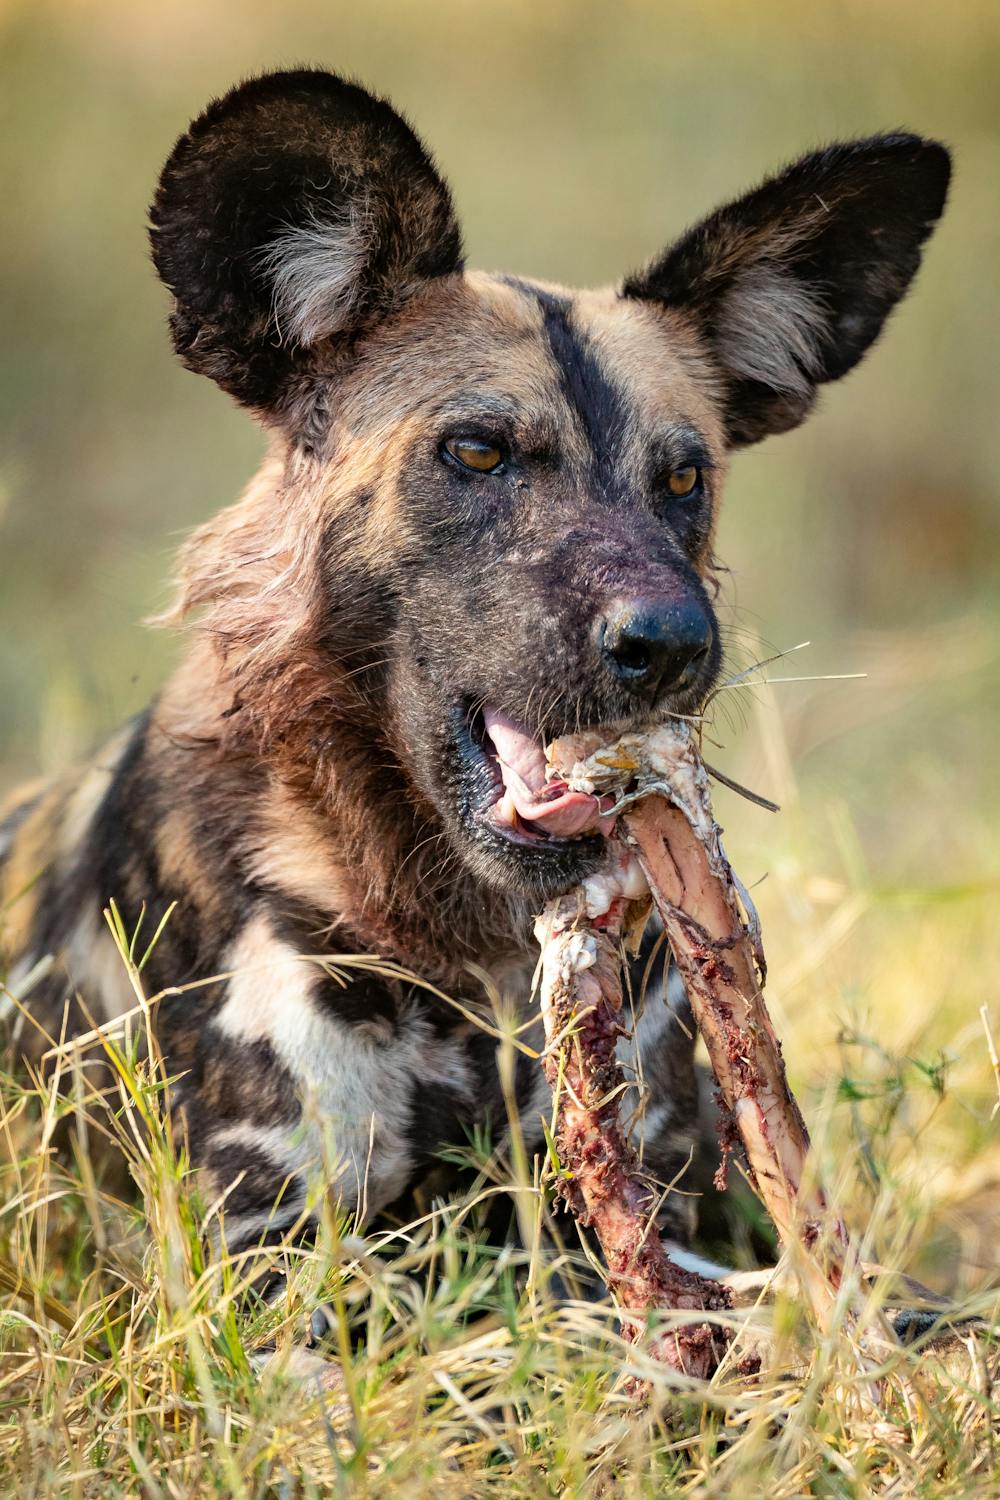 African wild dogs have a feeding queue: why it makes sense